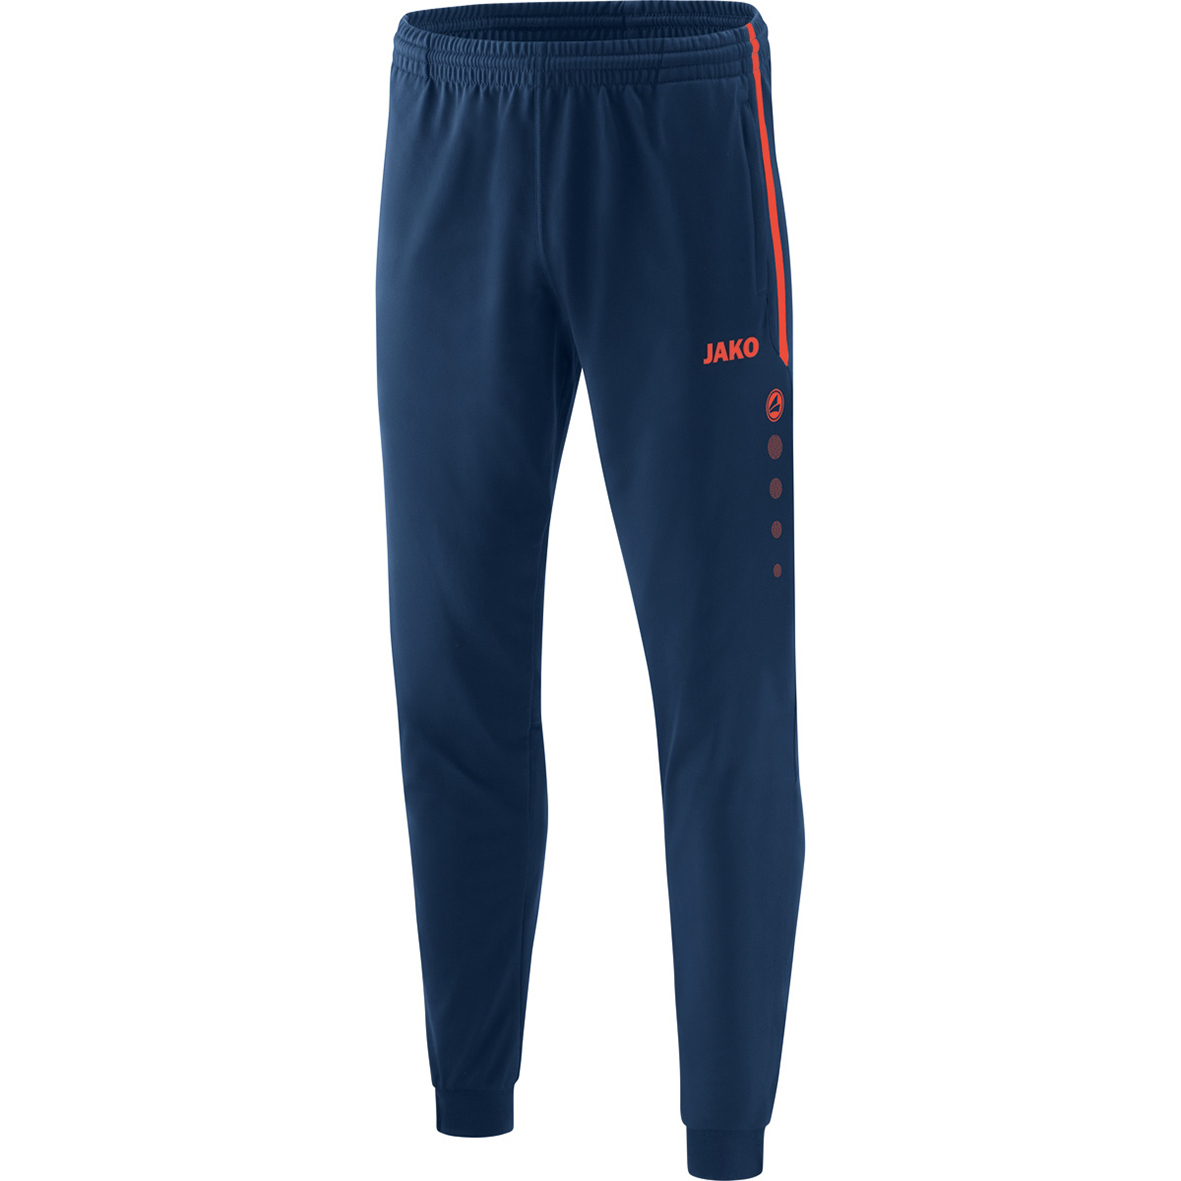 TROUSERS JAKO COMPETITION 2.0, NAVY-FLAME KIDS.